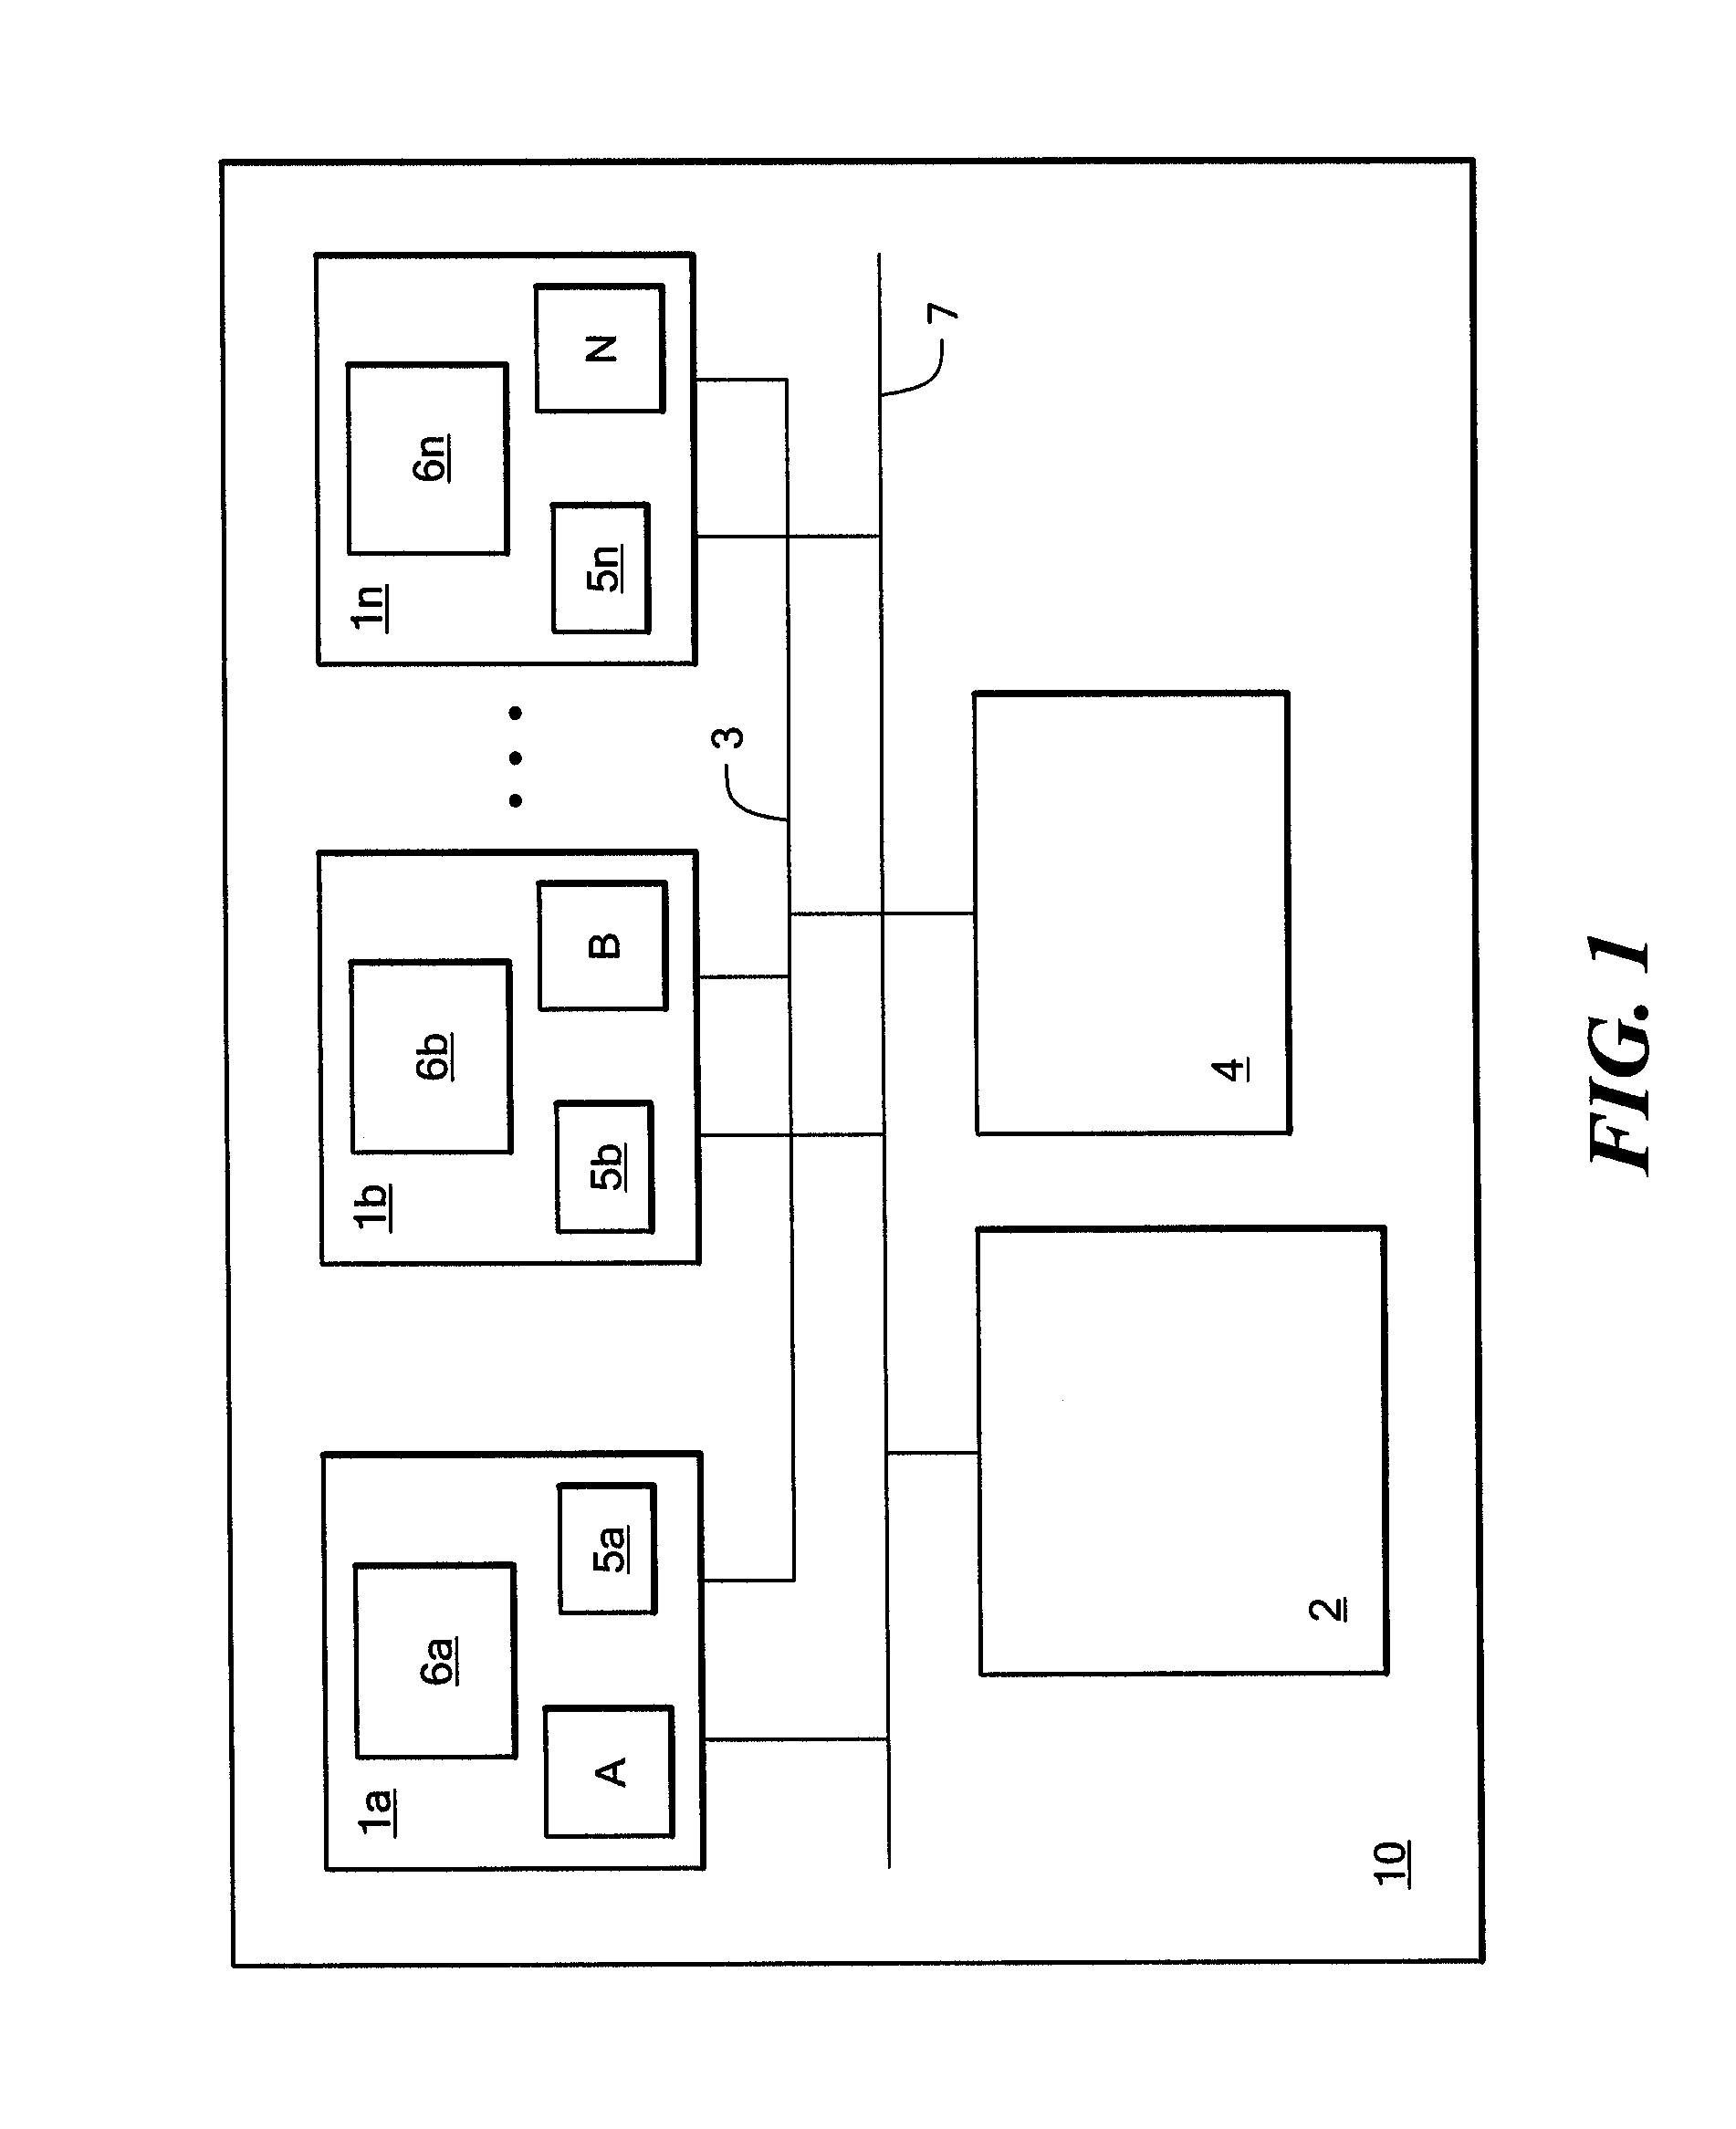 Method and apparatus for controlling exclusive access to a shared resource in a data storage system